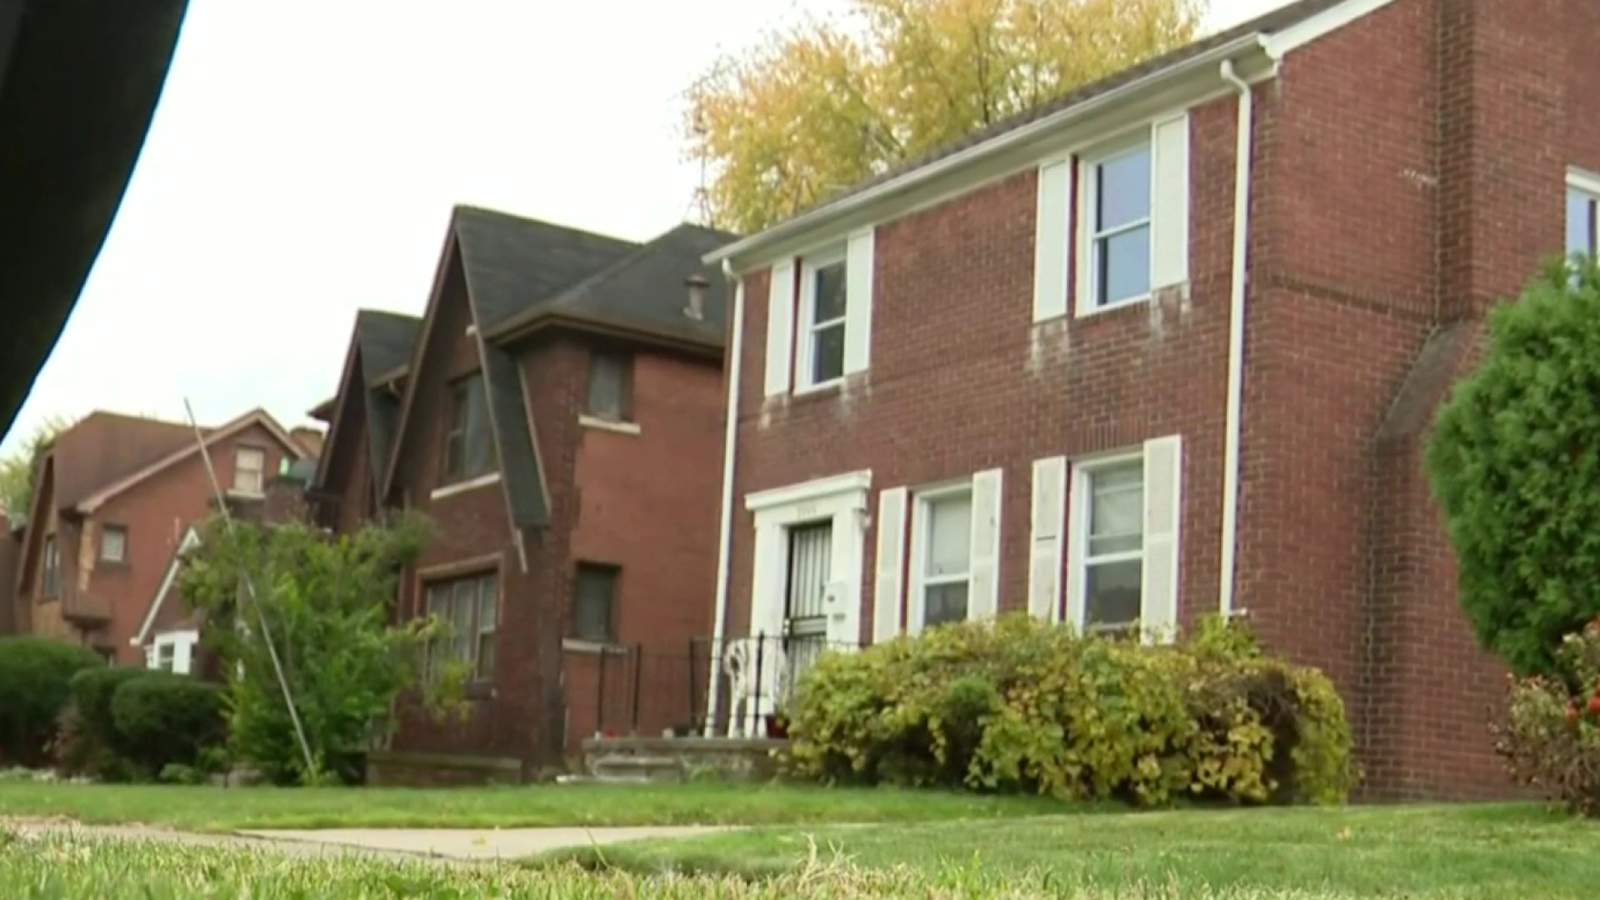 7-year-old girl shot in head at Detroit home now in grave condition, officials say